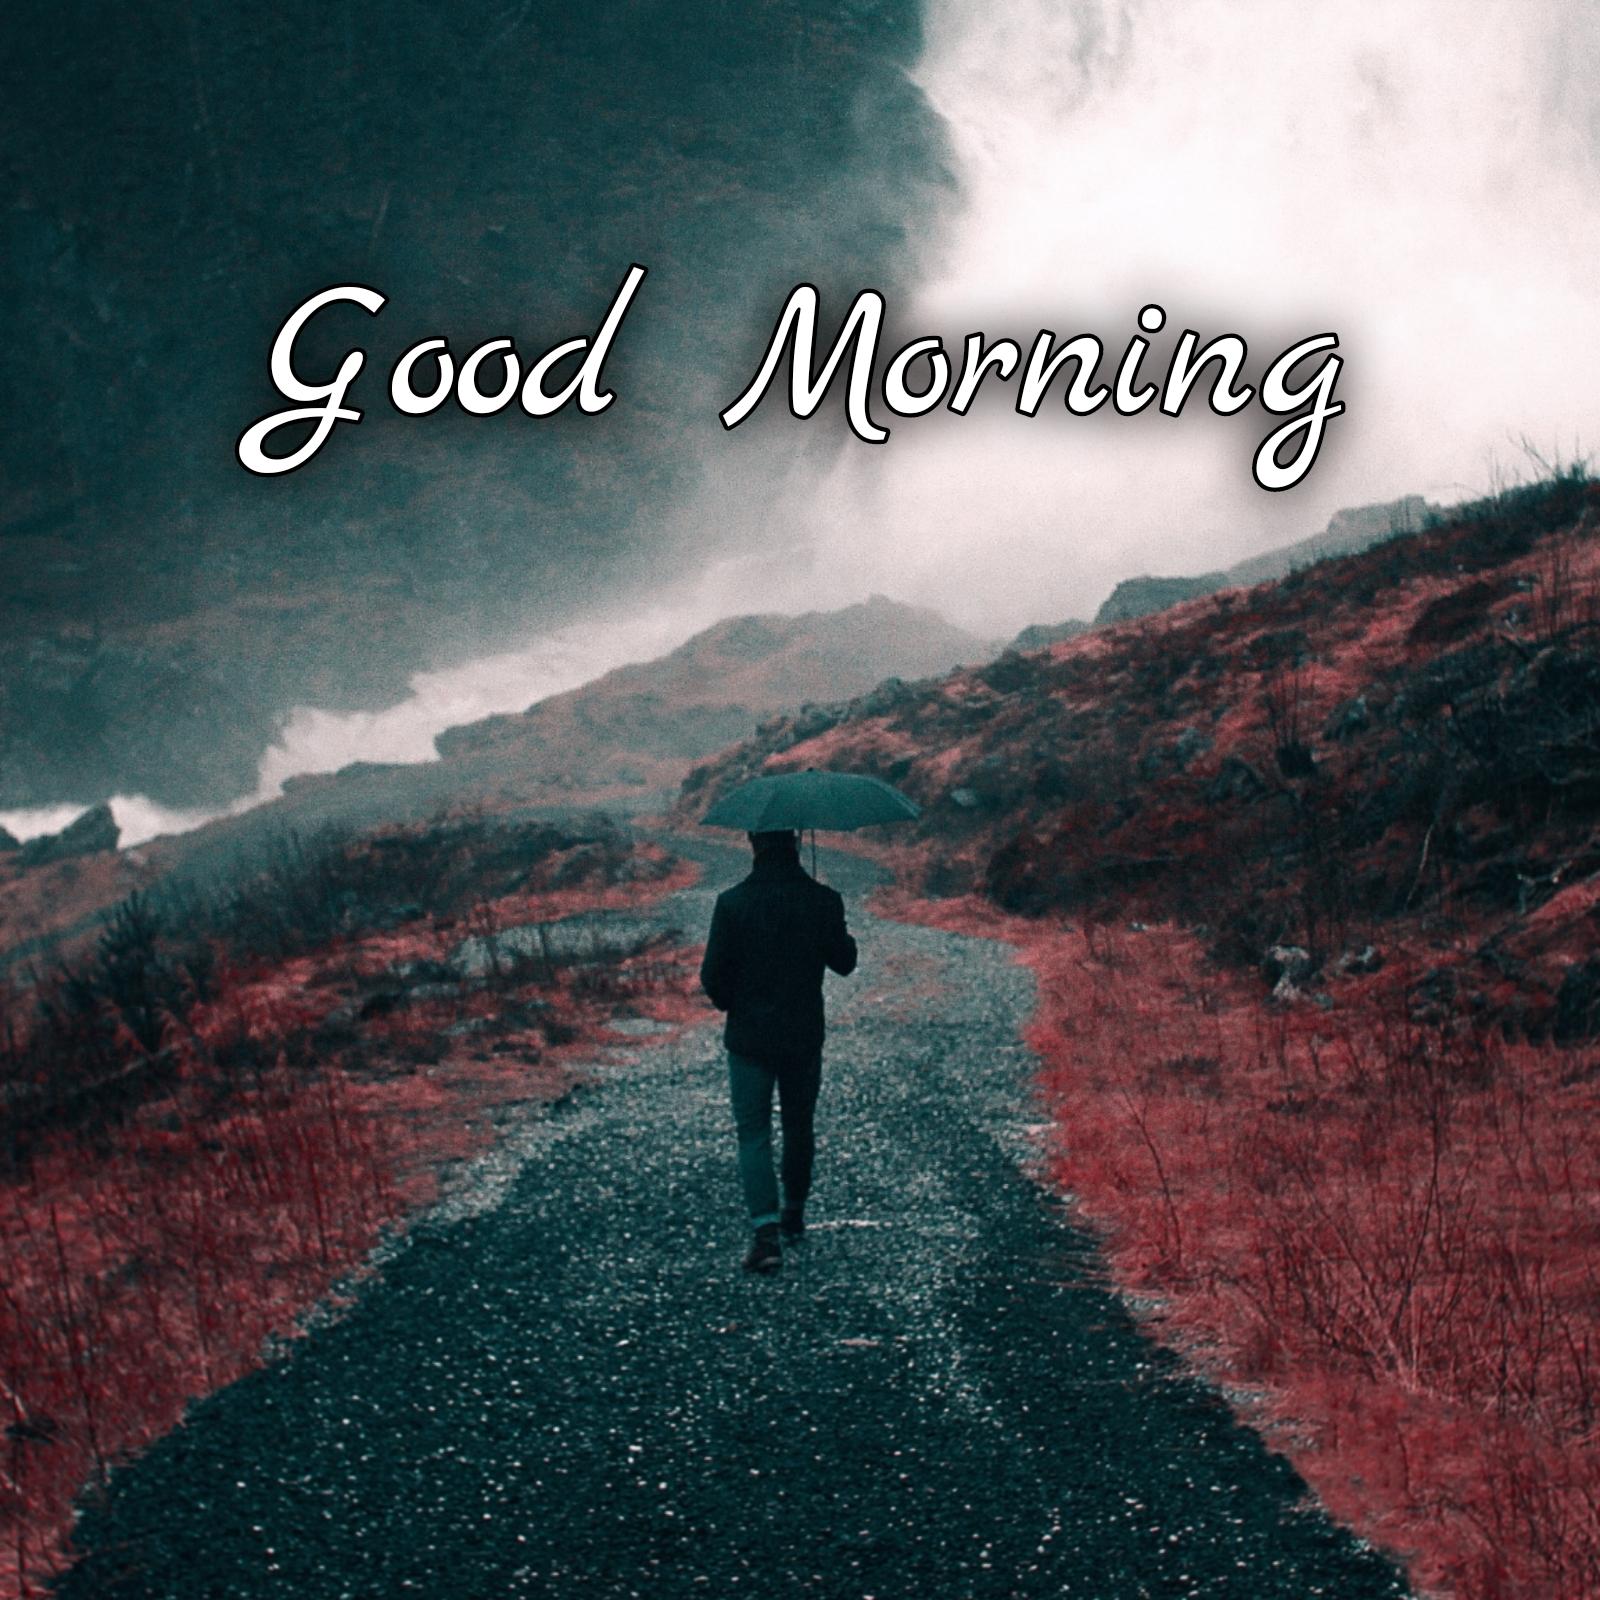 Good Morning Alone In Rain Images